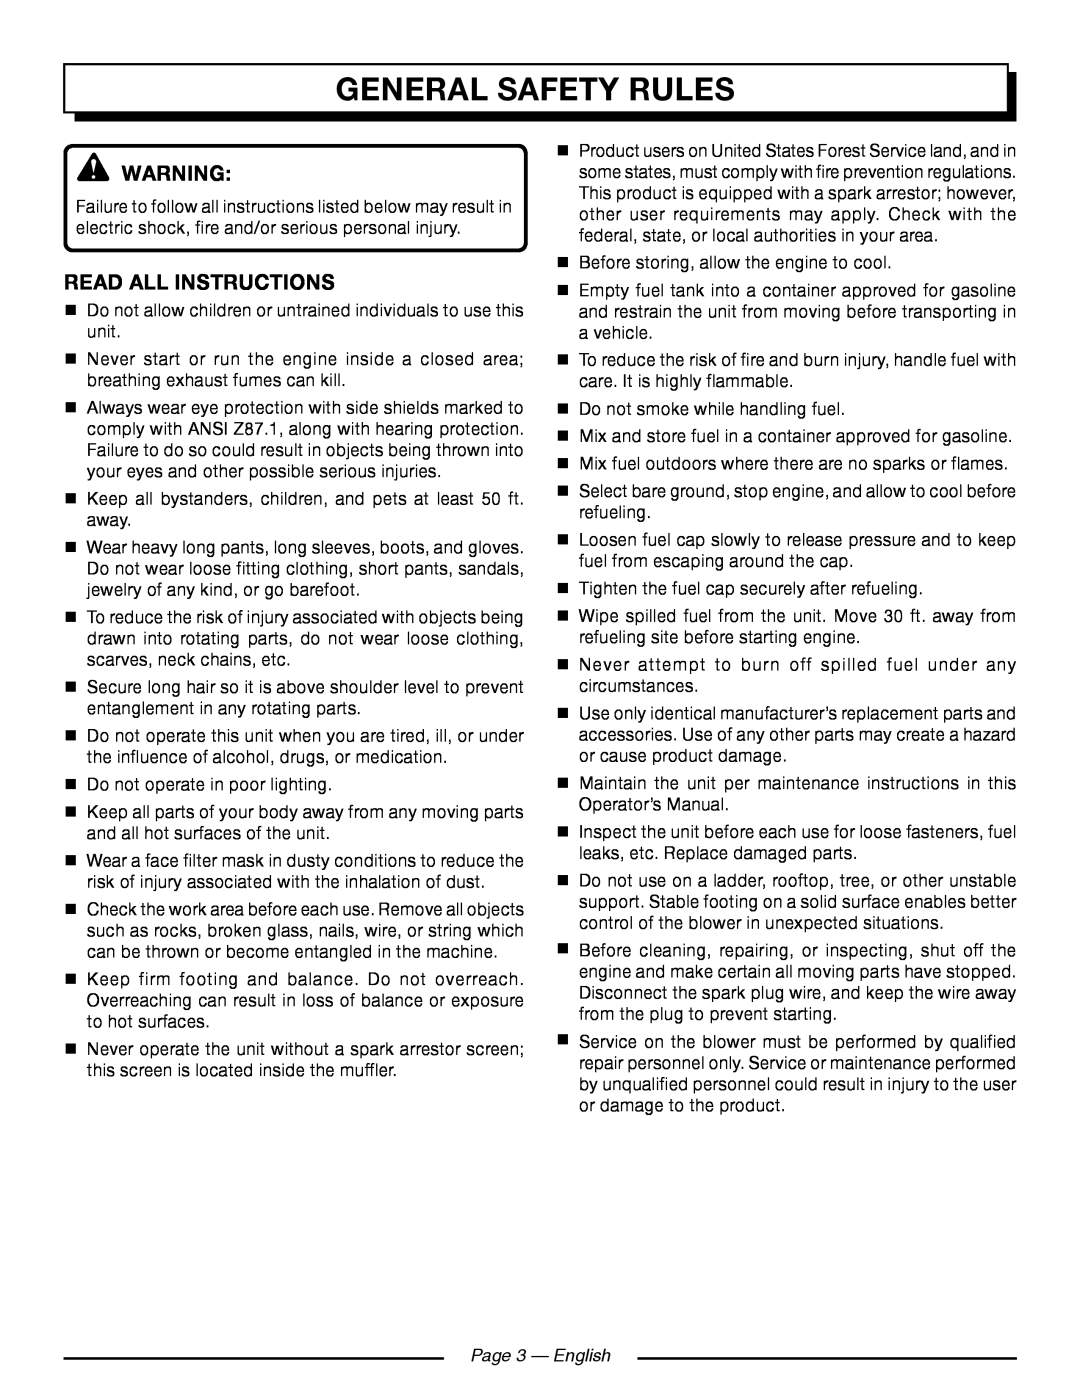 Homelite UT09521 manuel dutilisation General Safety Rules, Read All Instructions, Page 3 - English 